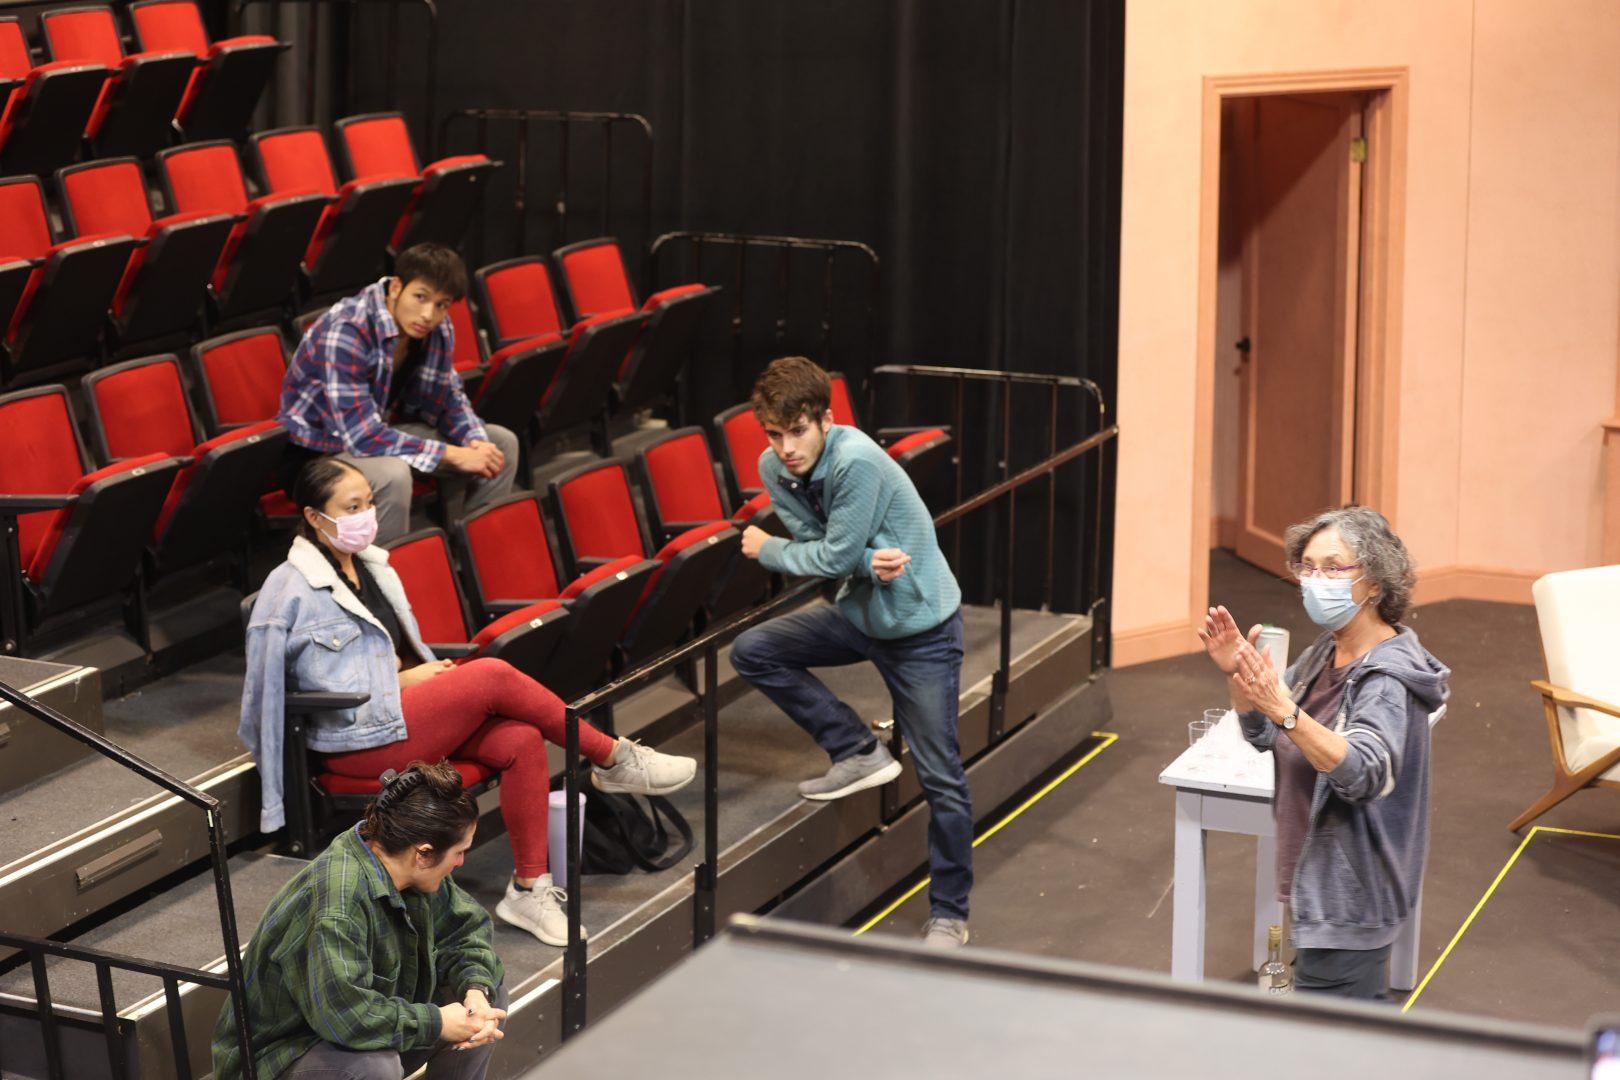 The play will be performed starting Friday, Sept. 30, through Saturday, Oct. 8. (Marcos Acosta/The Collegian)